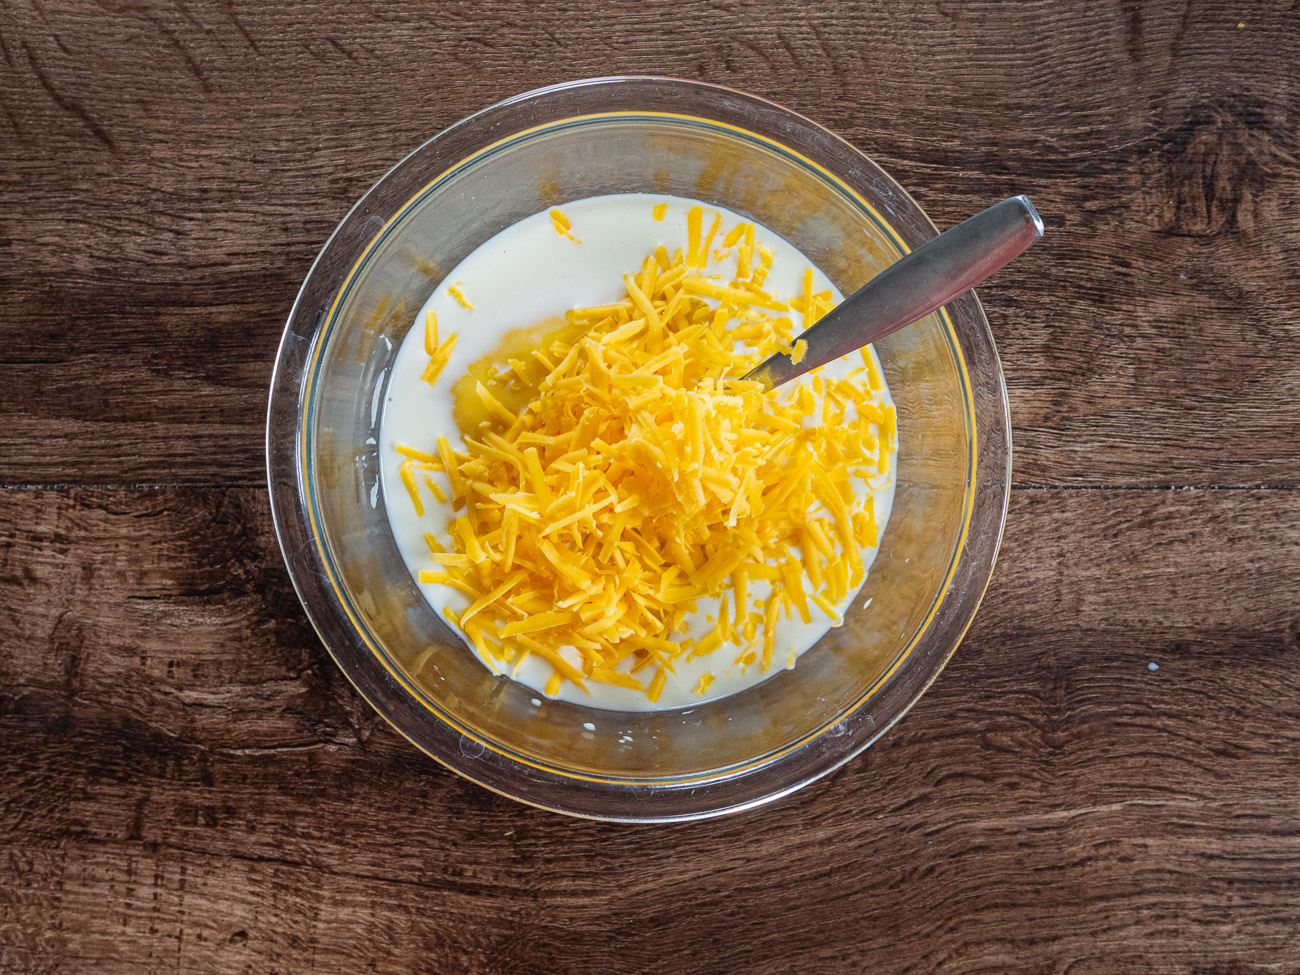 In a small bowl, mix together milk, soup, and cheese. Spread 1/3 cup of mixture in prepared baking dish.